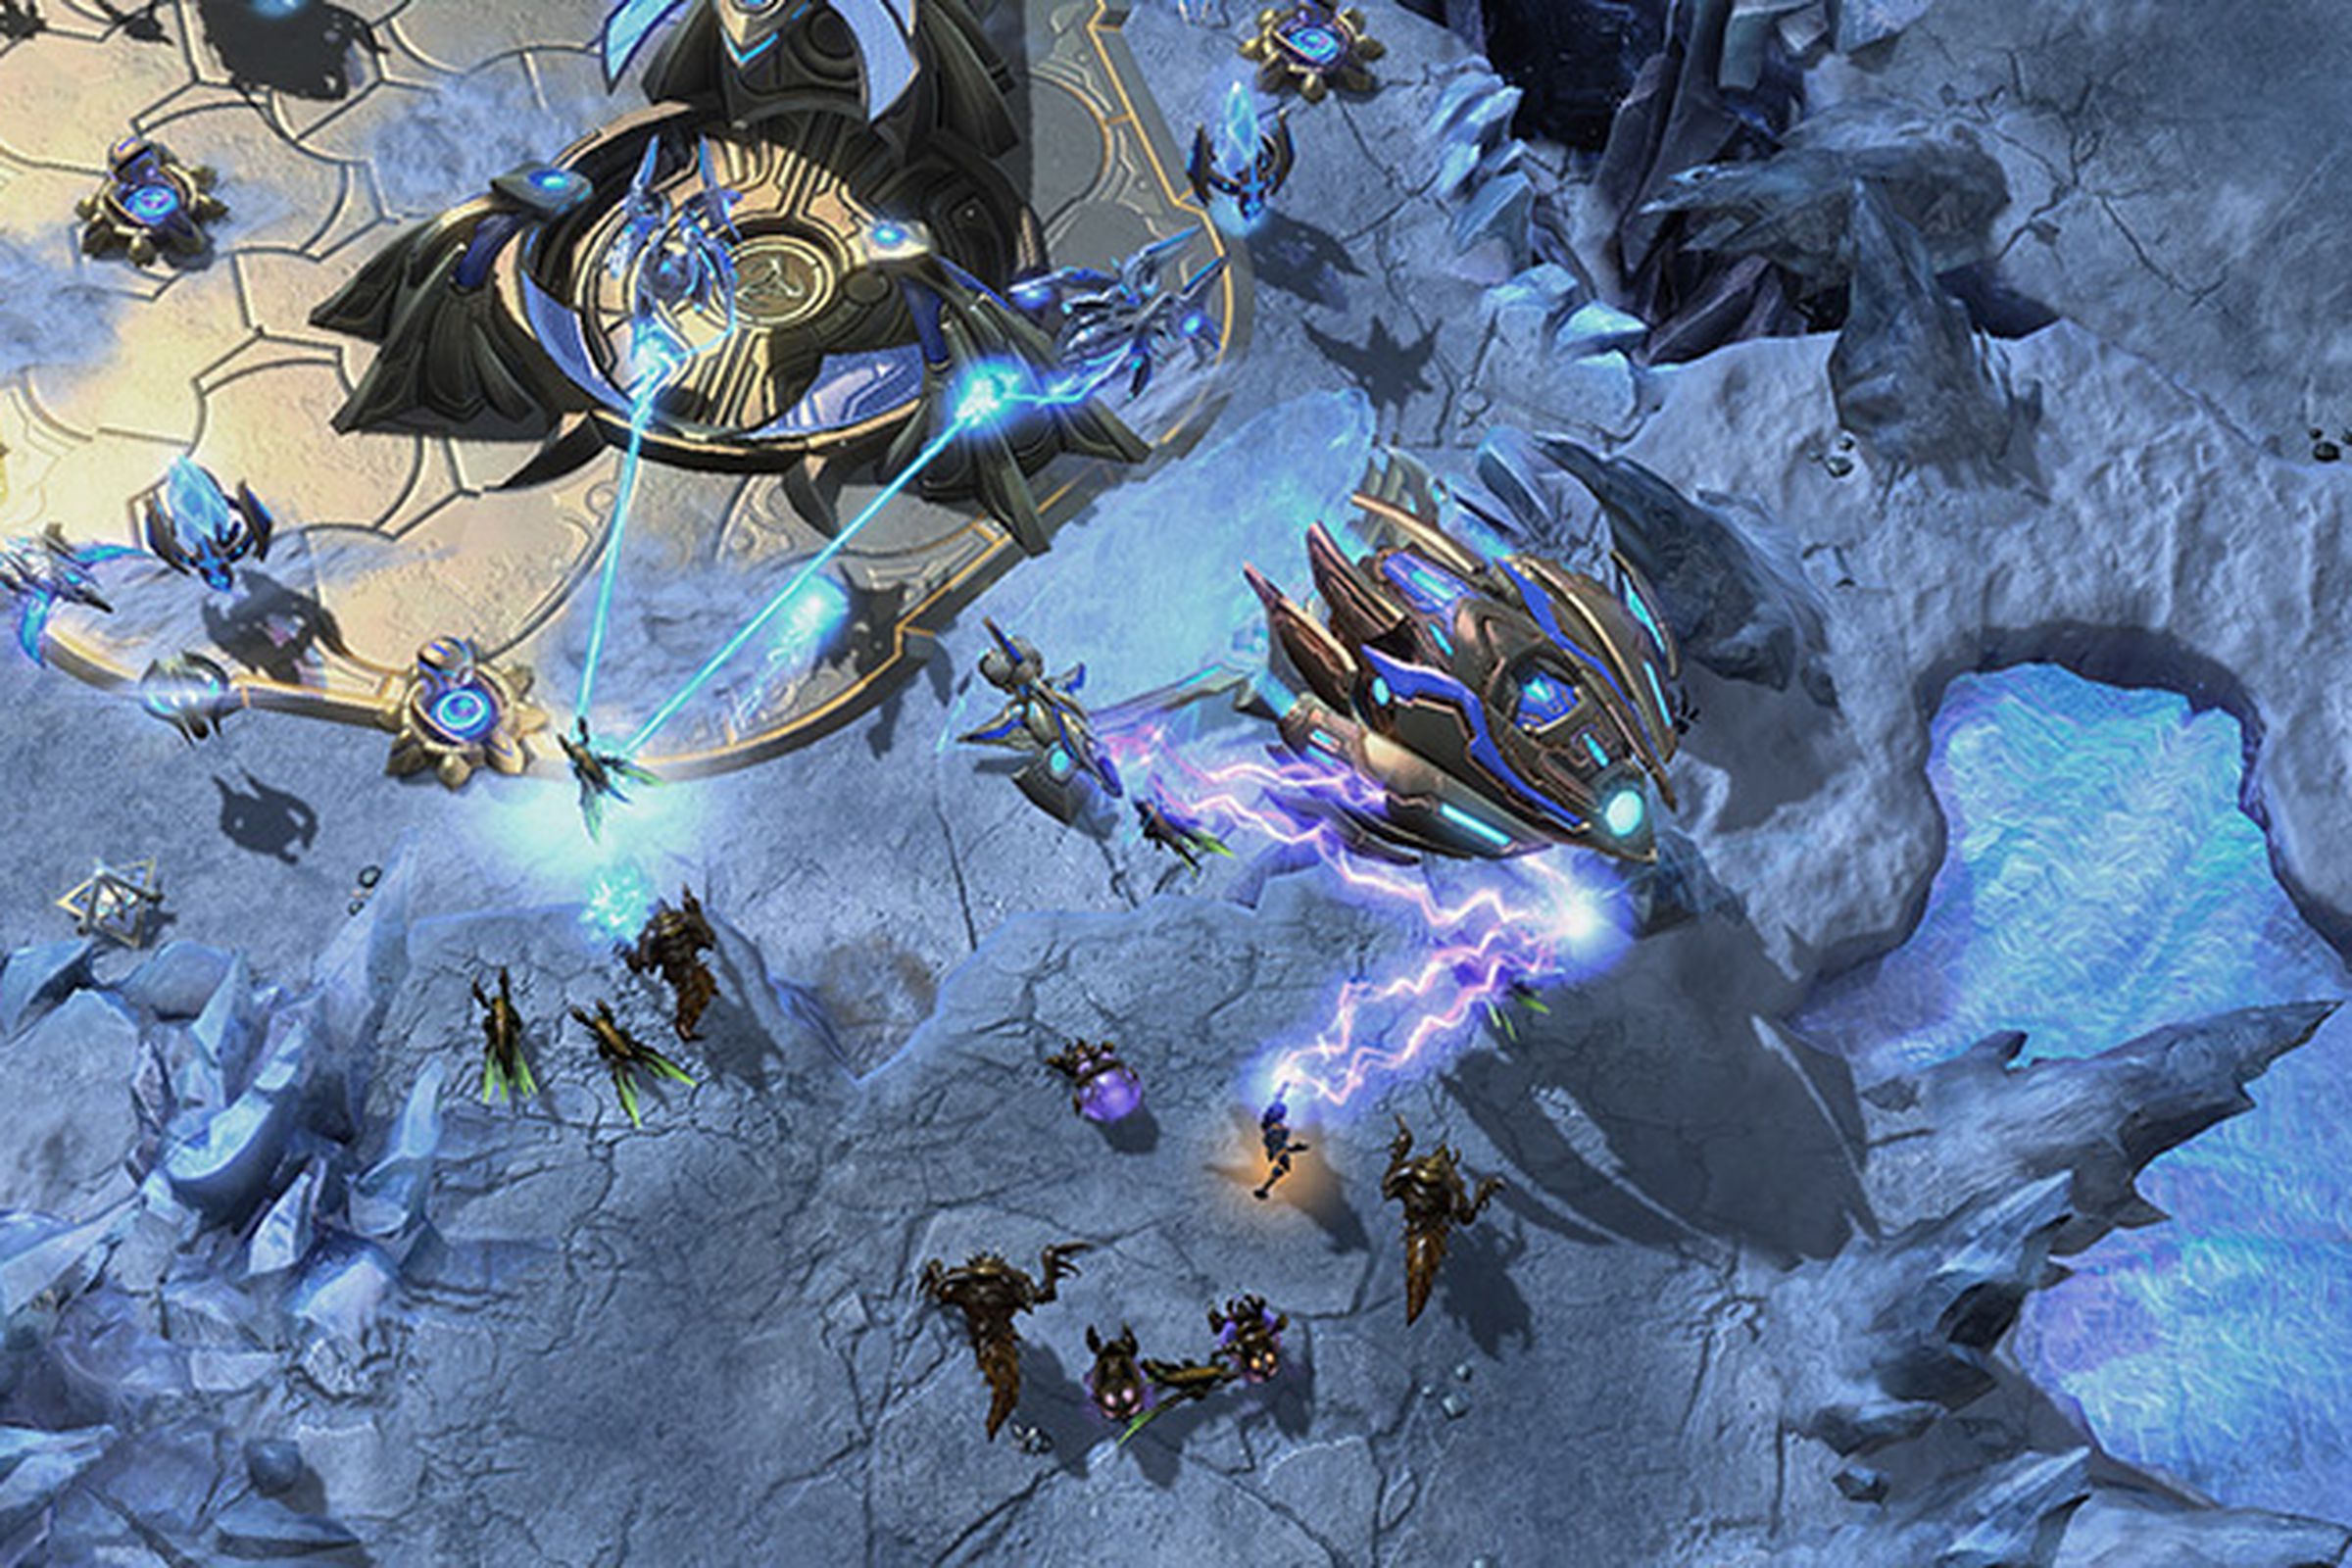 A screenshot of Starcraft II, a real-time strategy game where players control human or alien armies.